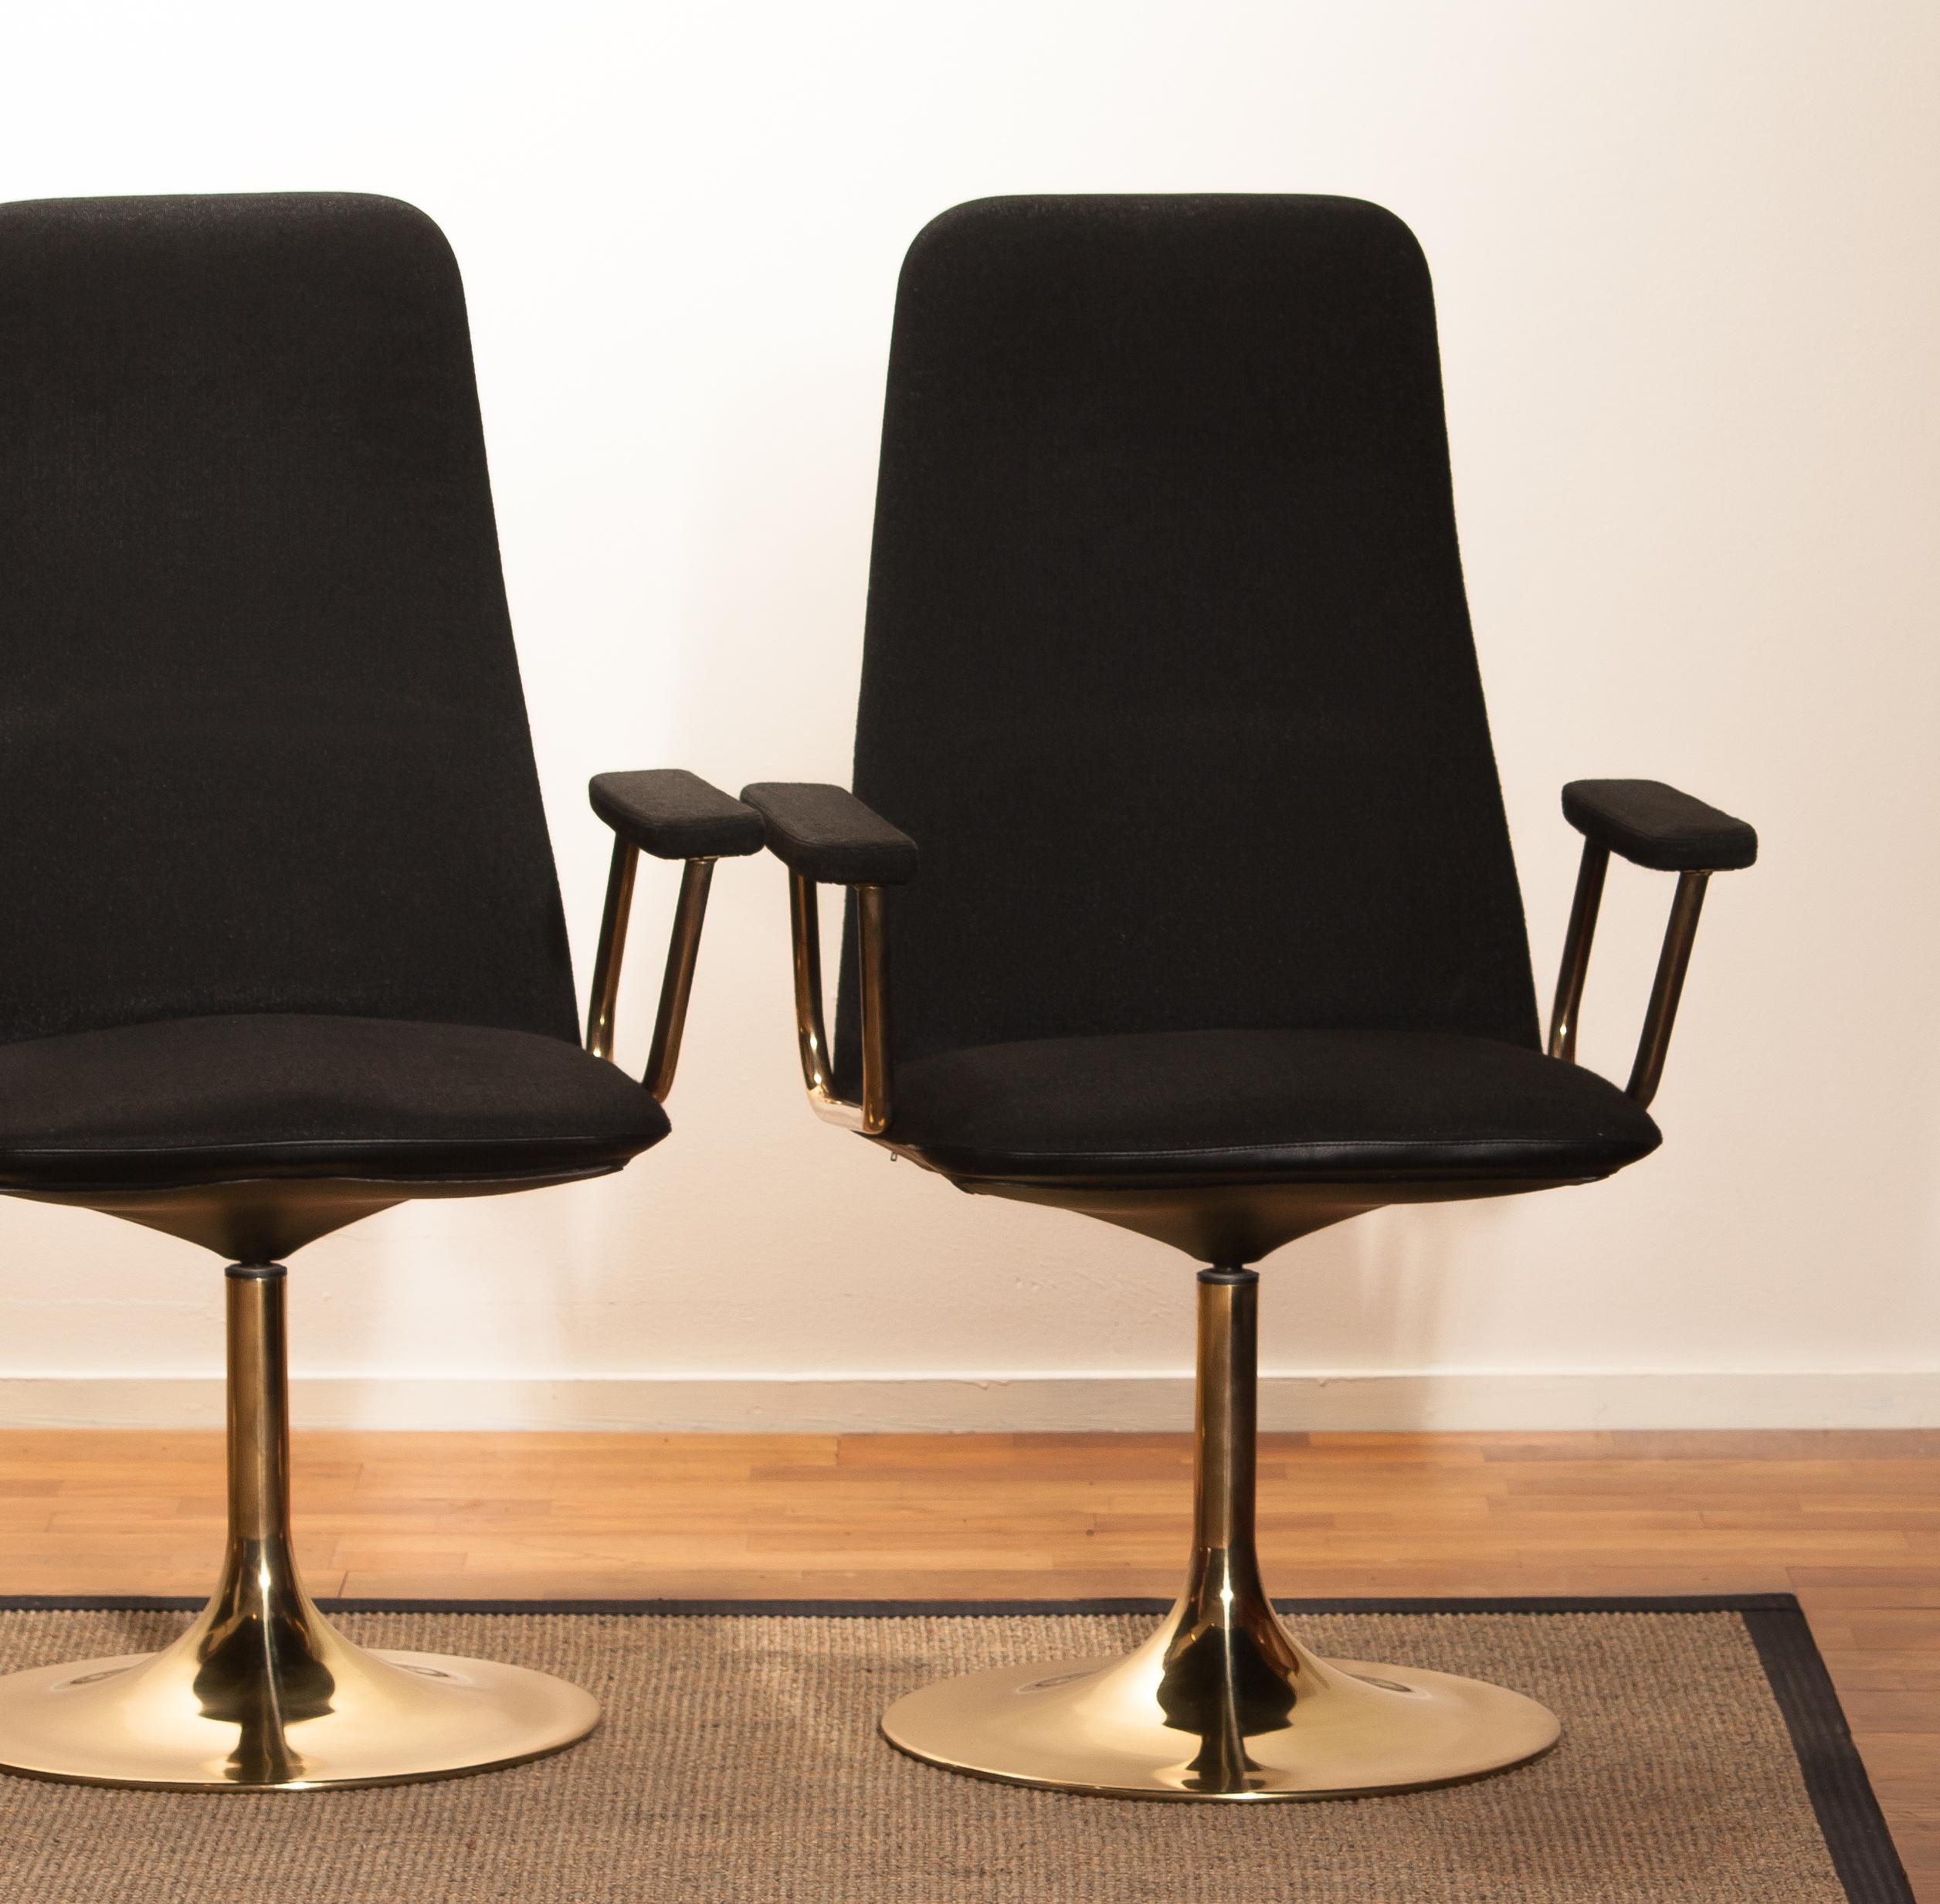 Late 20th Century Four Golden, with Black Fabric, Armrest Swivel Chairs by Johanson Design, 1970